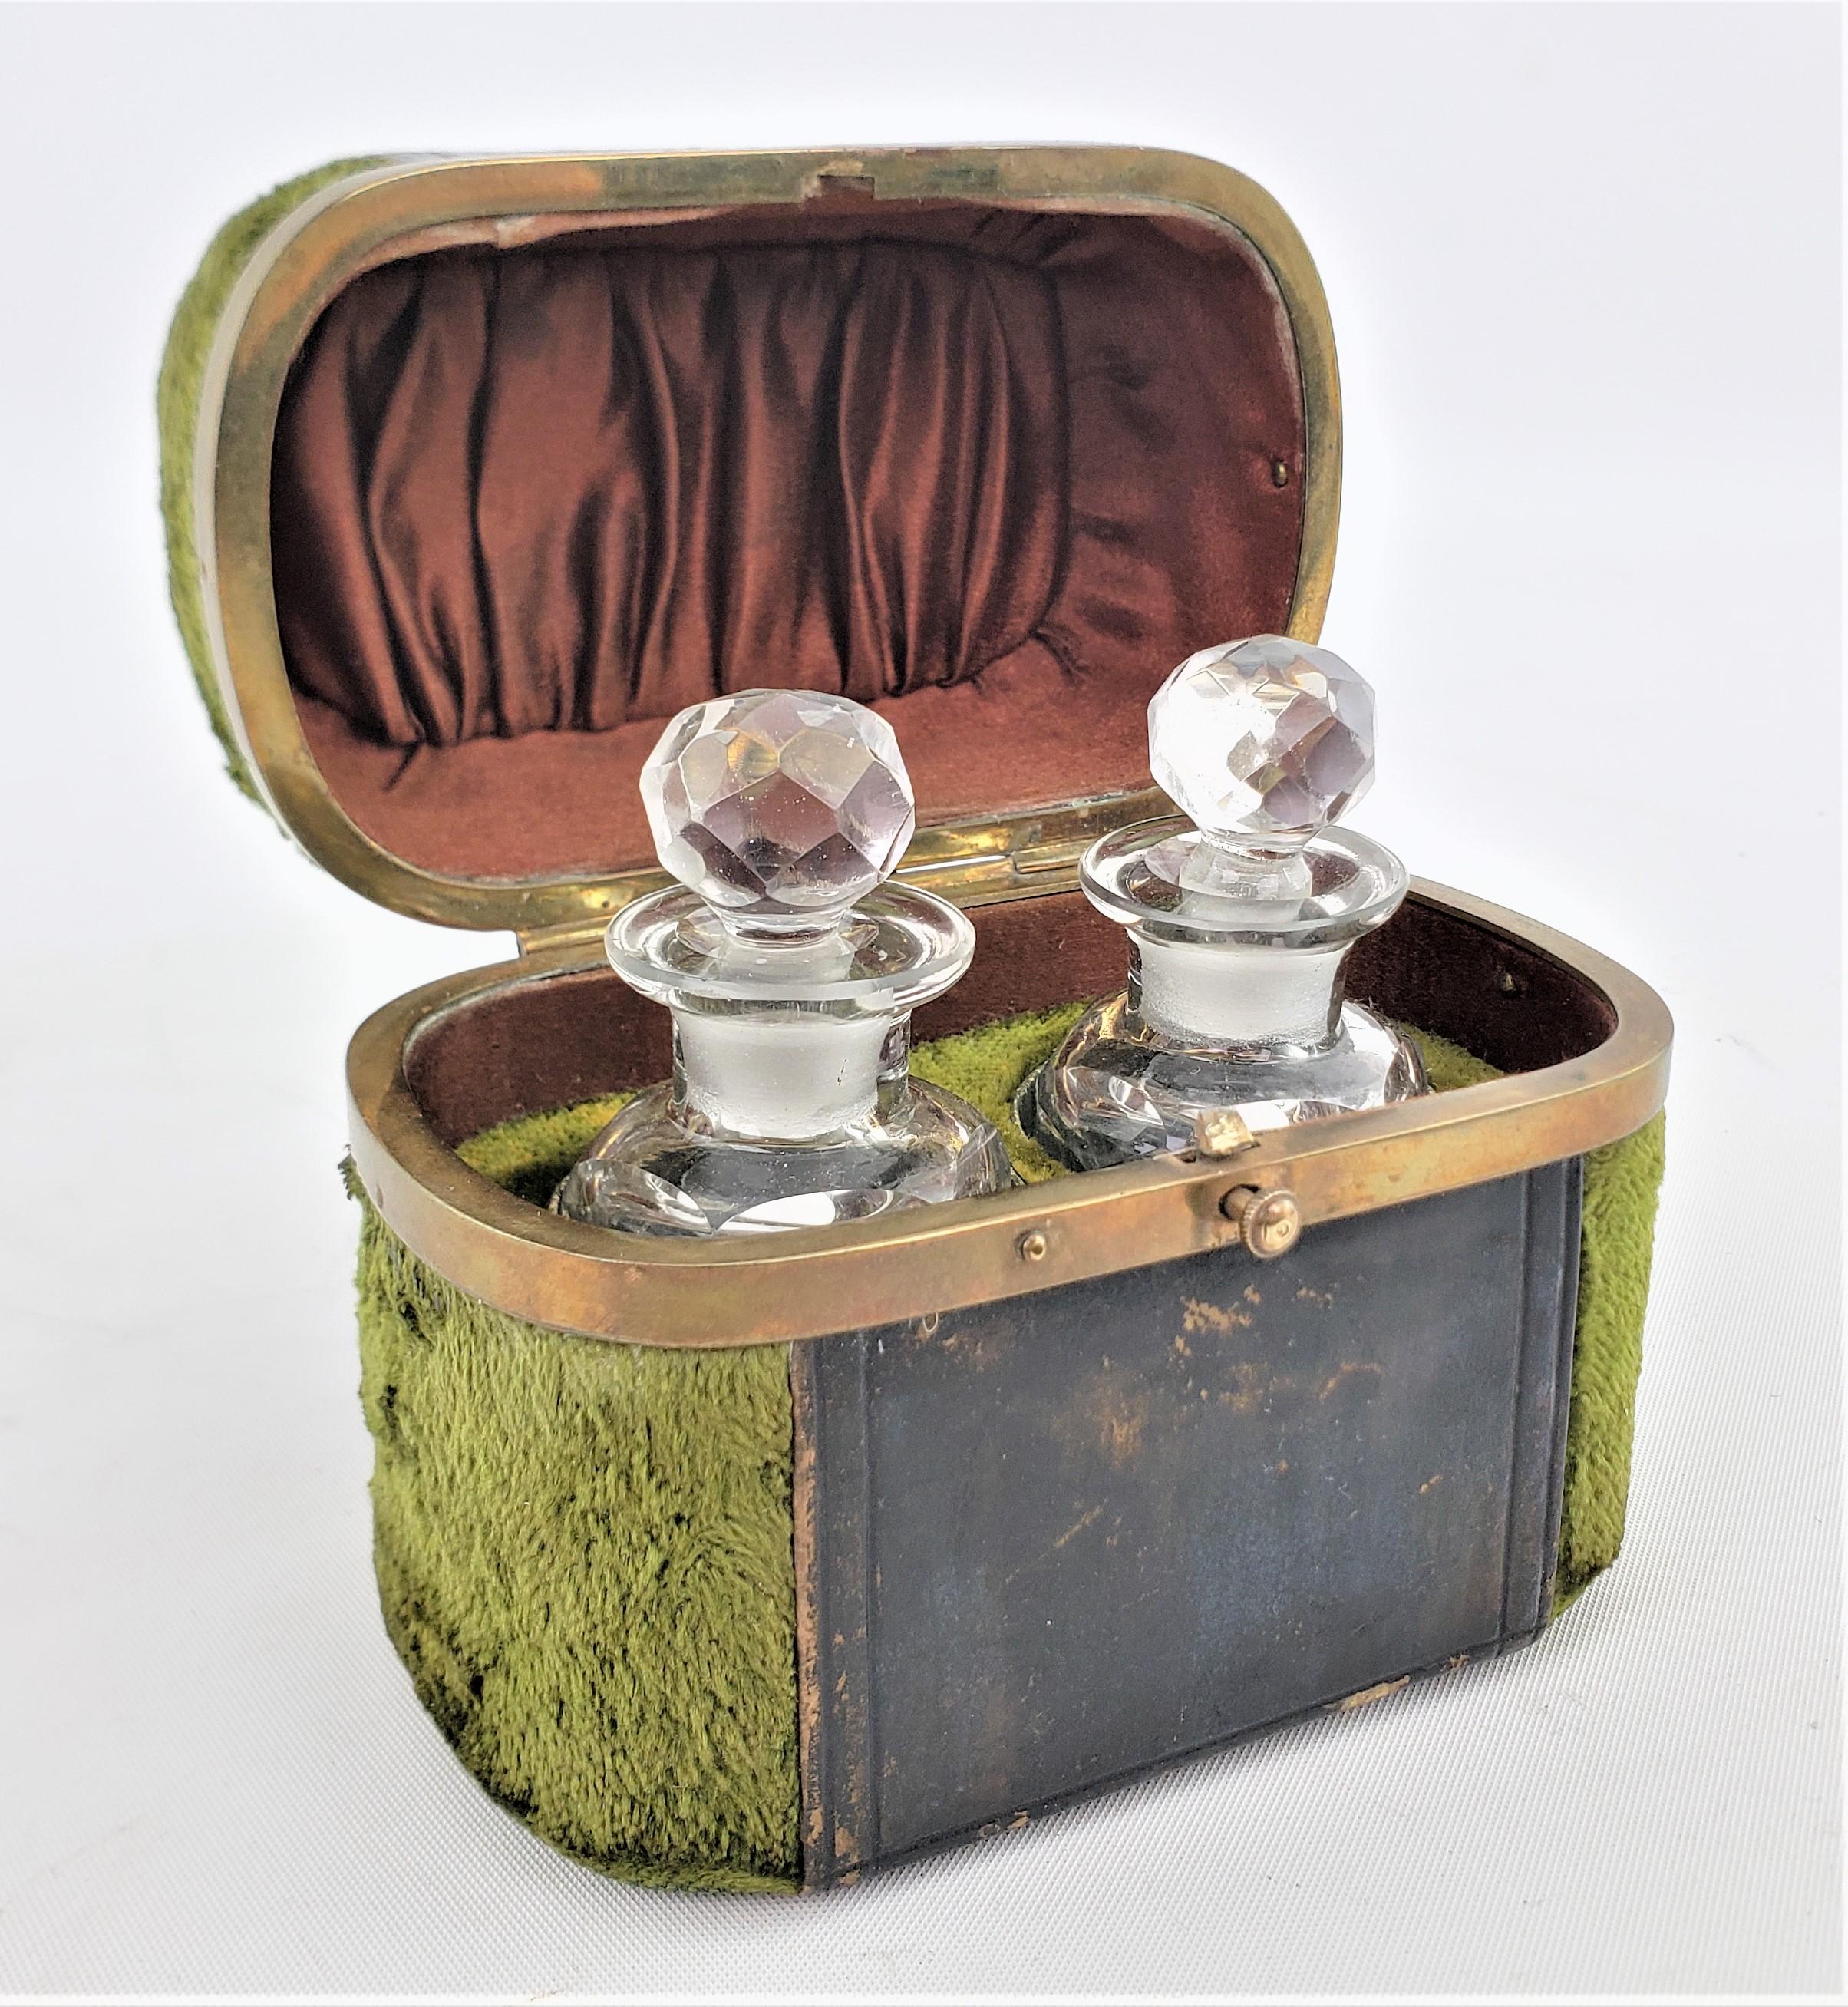 This antique set of glass perfume or scent bottles with a fitted case are unsigned, but presumed to have originated from France and dating to approximately 1880 in the period Louis XVI style. The bottles are composed of clear glass with faceted